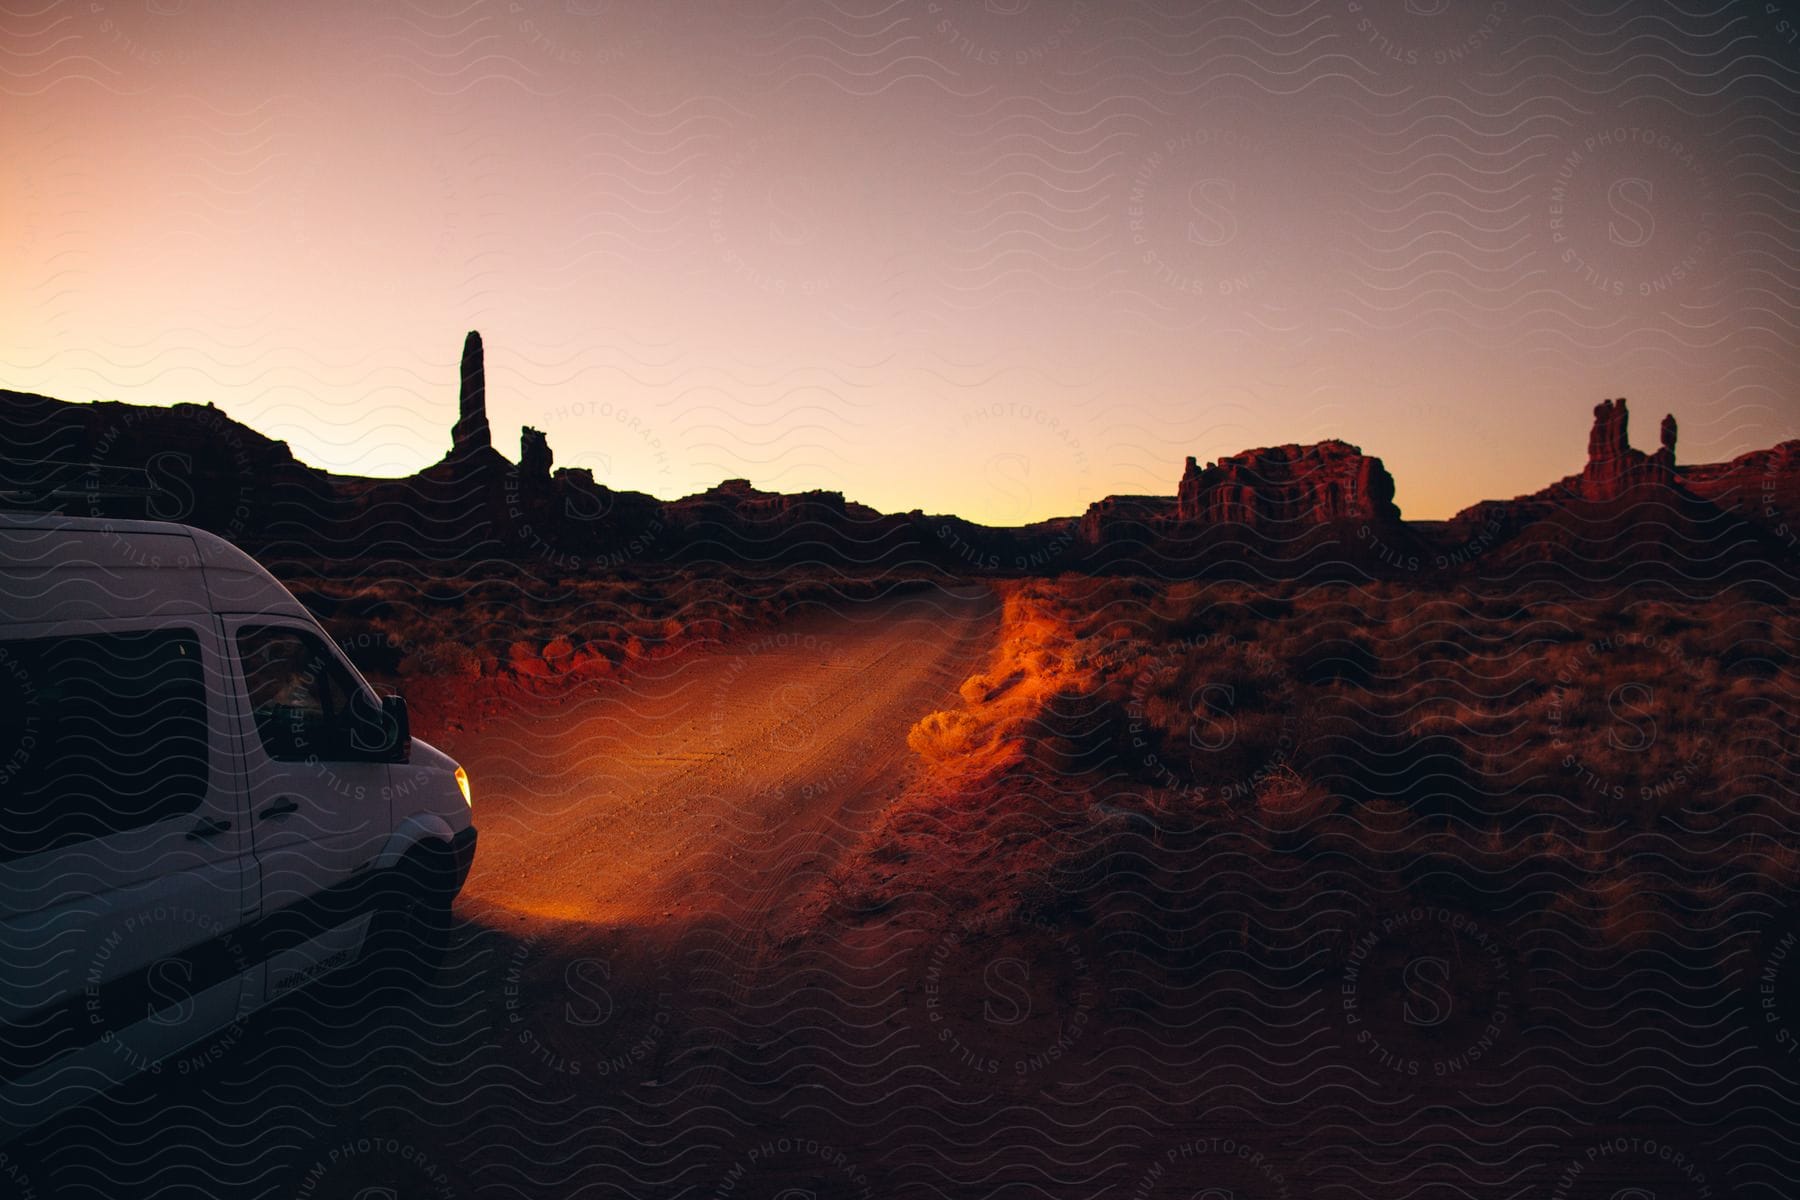 Van headlights illuminate a dirt road through a desert landscape, with a rock formation silhouetted at sunset.